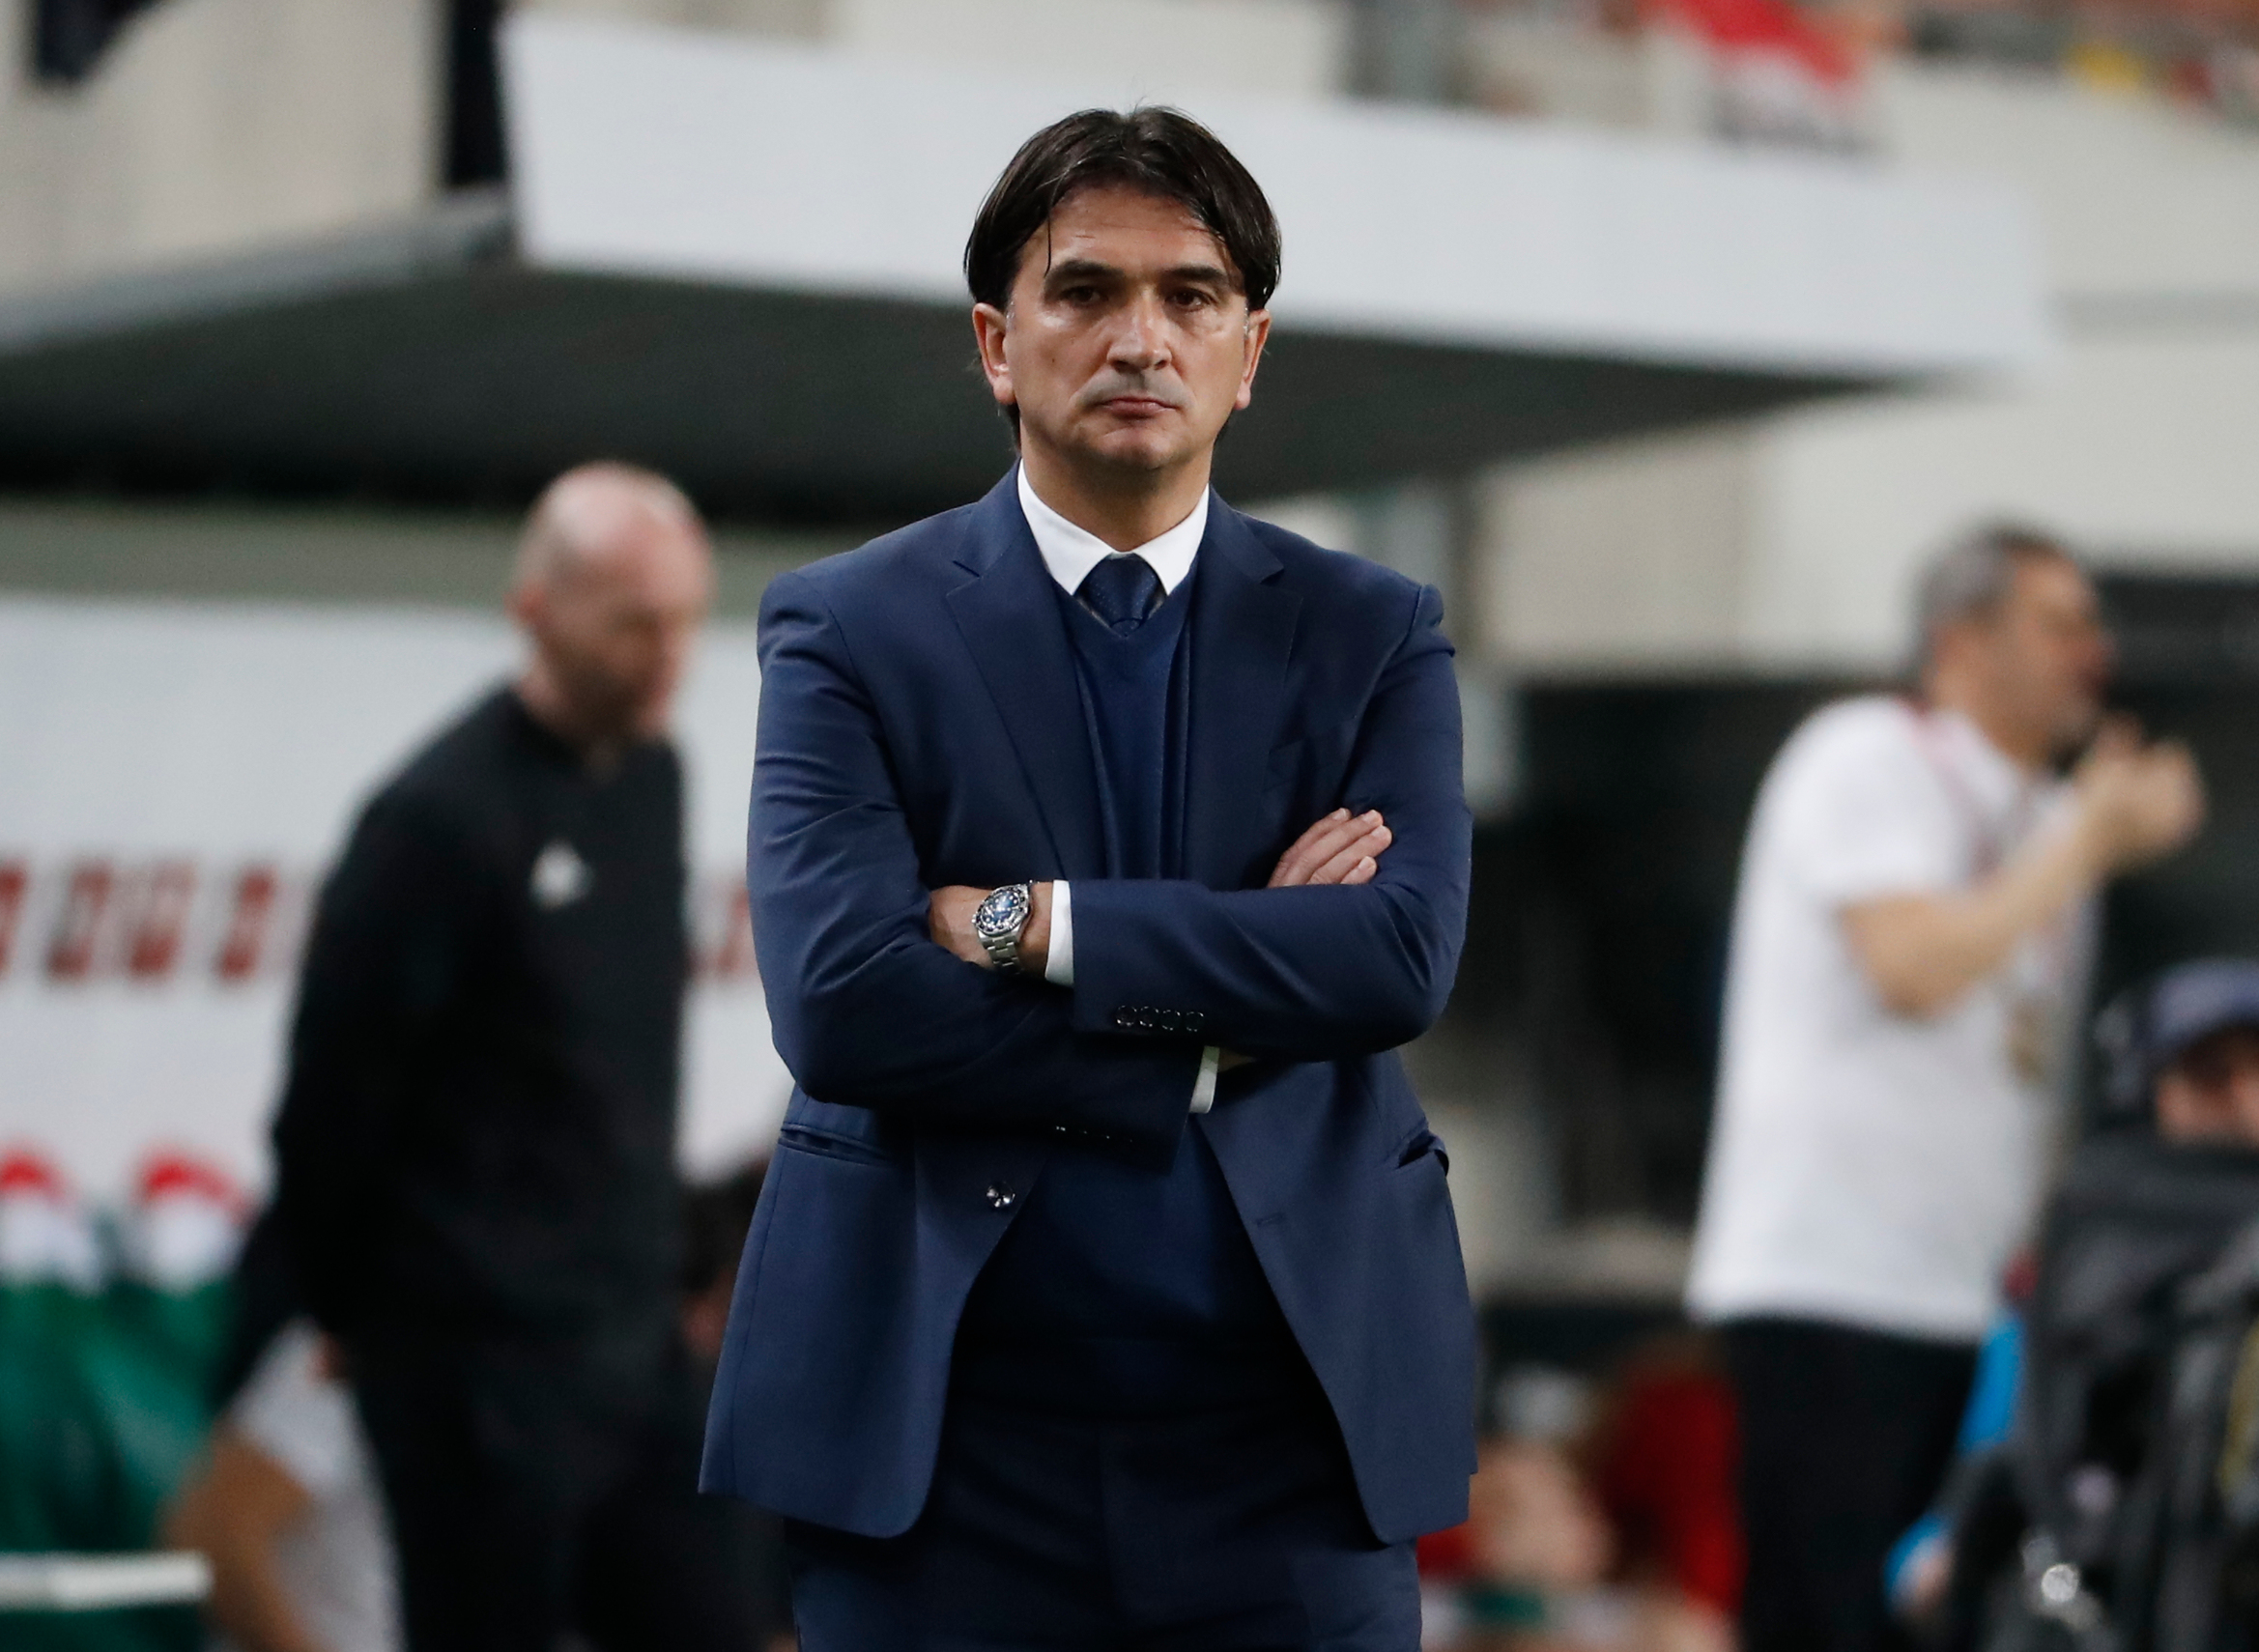 BUDAPEST, HUNGARY - MARCH 24: Head coach Zlatko Dalic of Croatia reacts during the 2020 UEFA European Championships group E qualifying match between Hungary and Croatia at Groupama Arena on March 24, 2019 in Budapest, Hungary. (Photo by Laszlo Szirtesi/Getty Images)